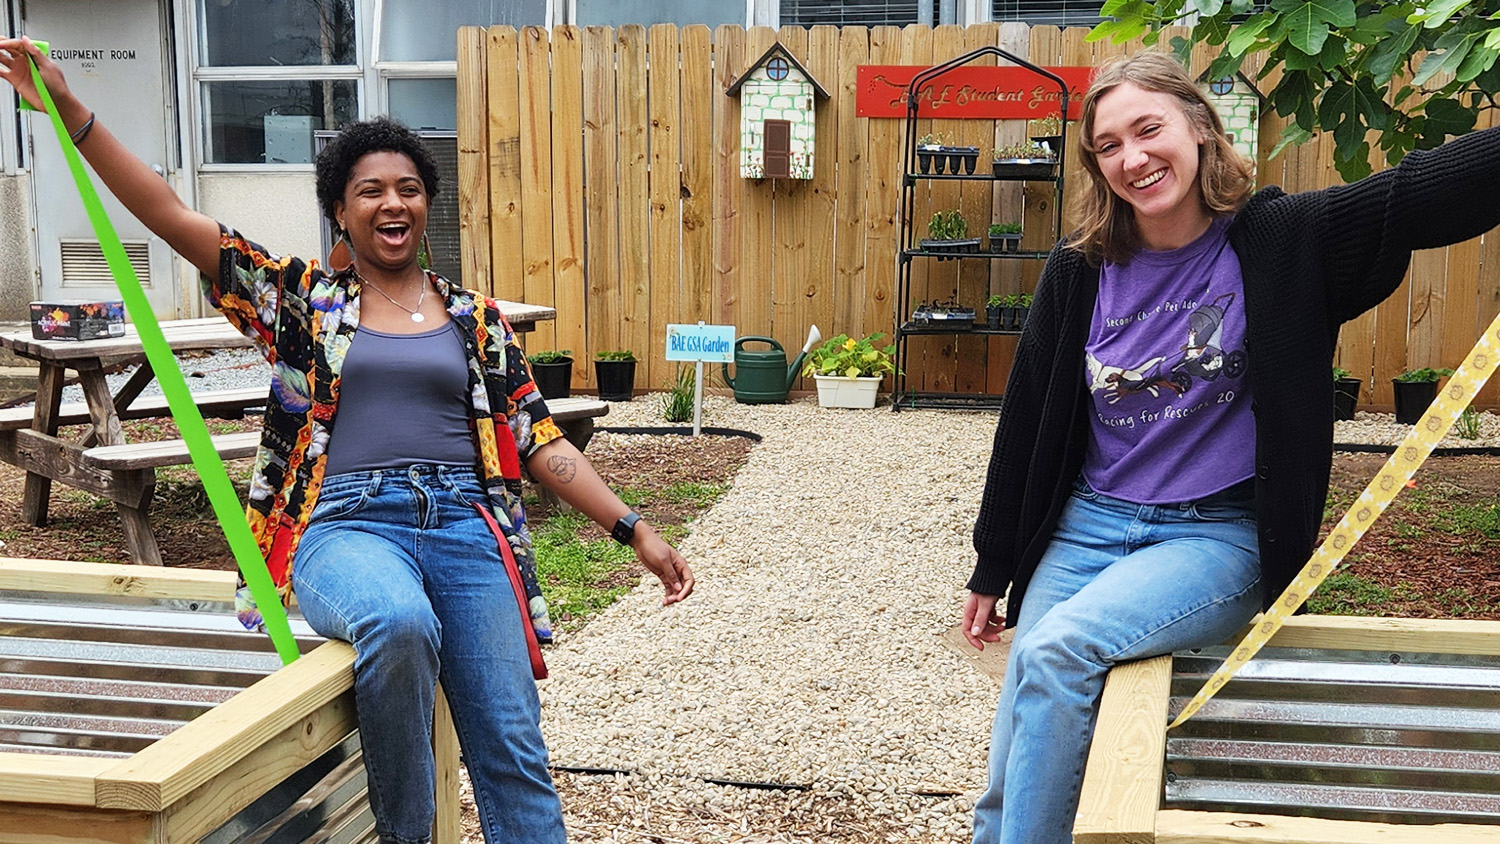 Two young women sitting on garden planters laughing